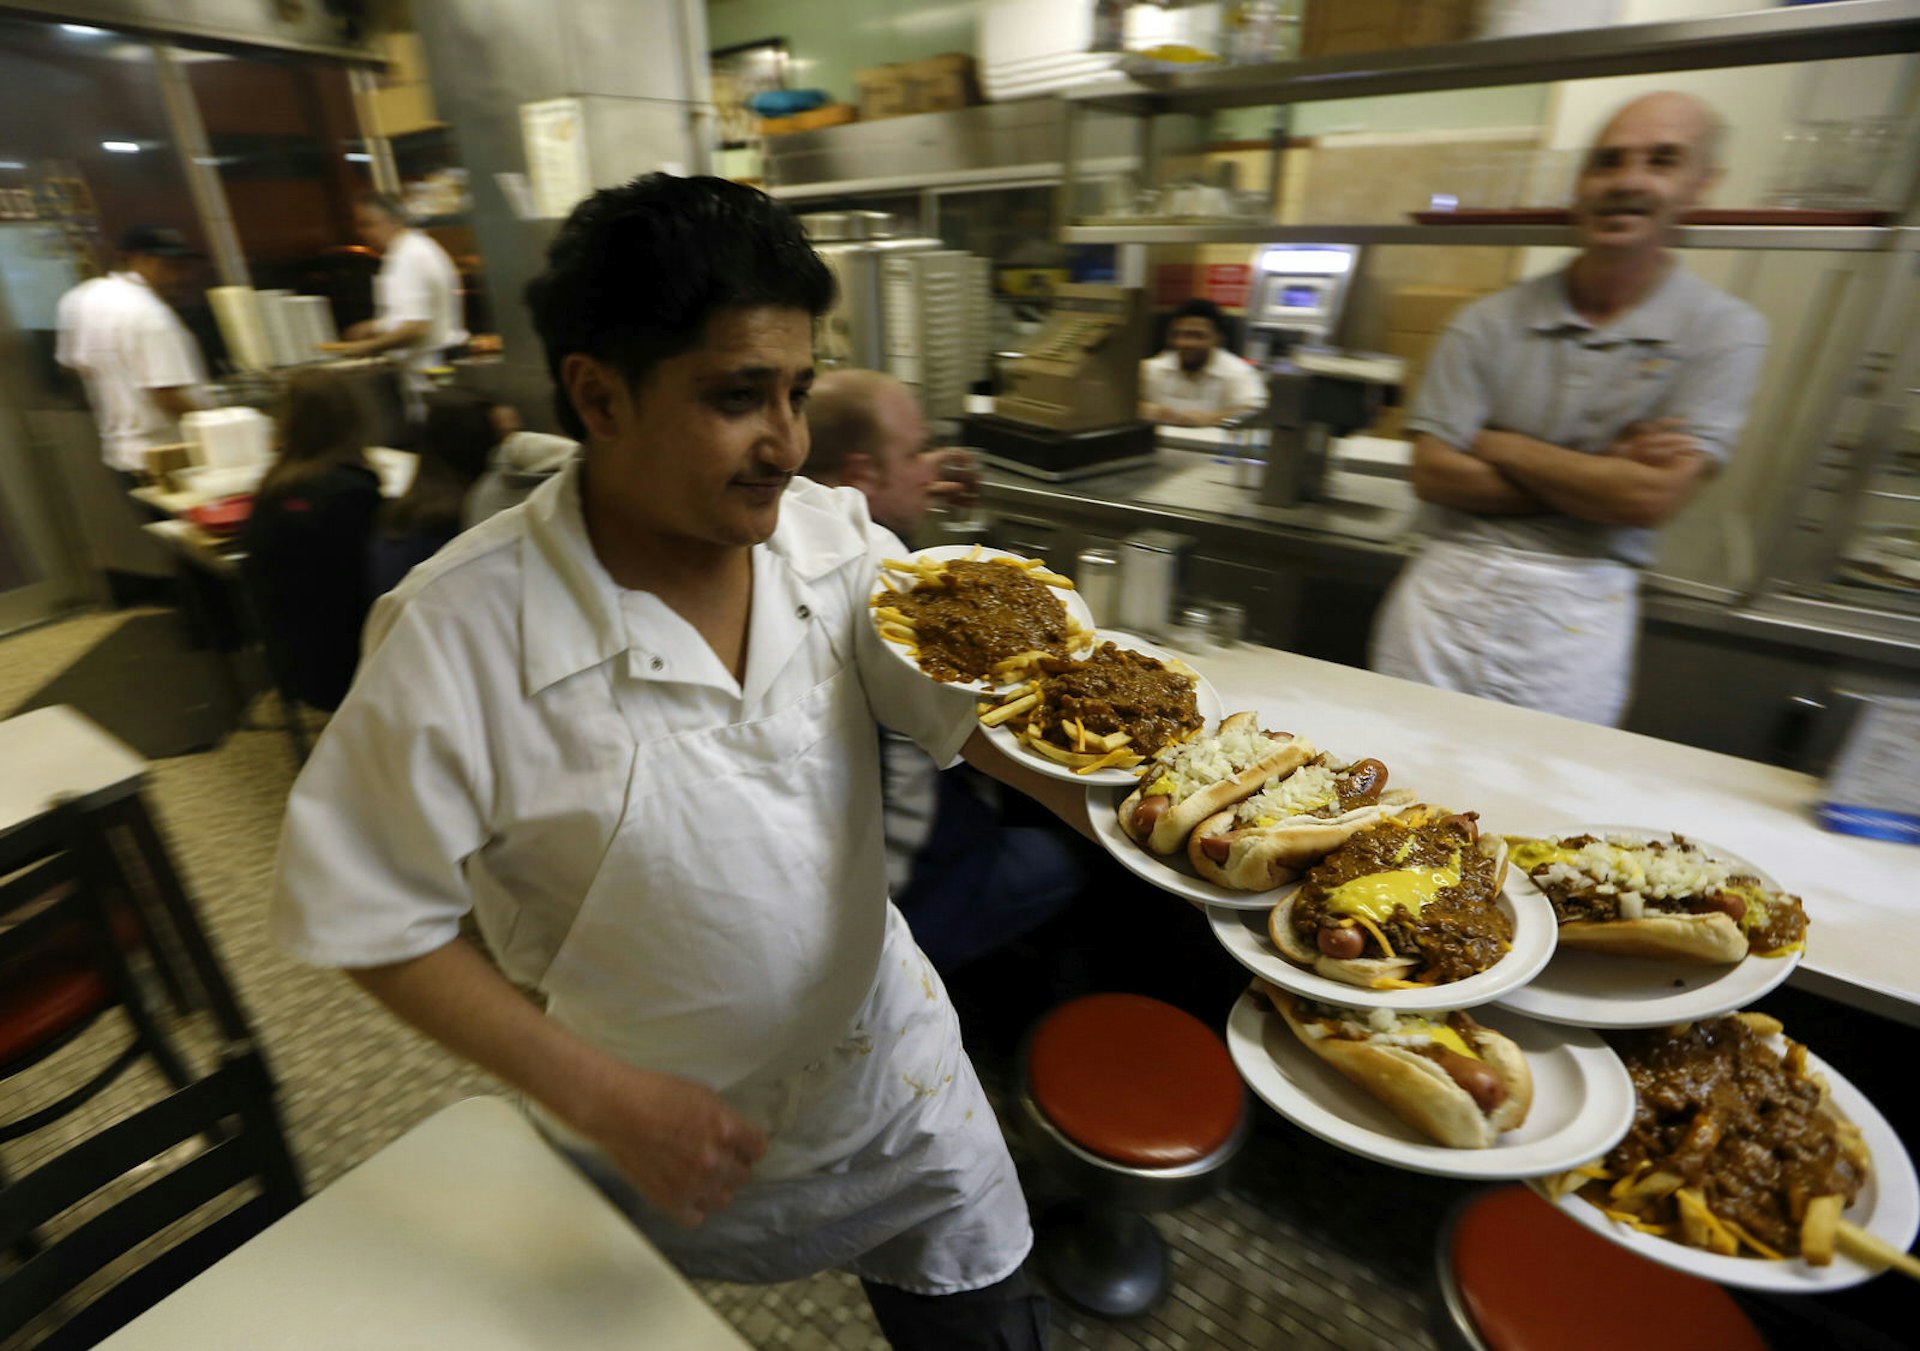 A waiter delivering coney dogs and chili fries at Lafayette Coney Island in Detroit